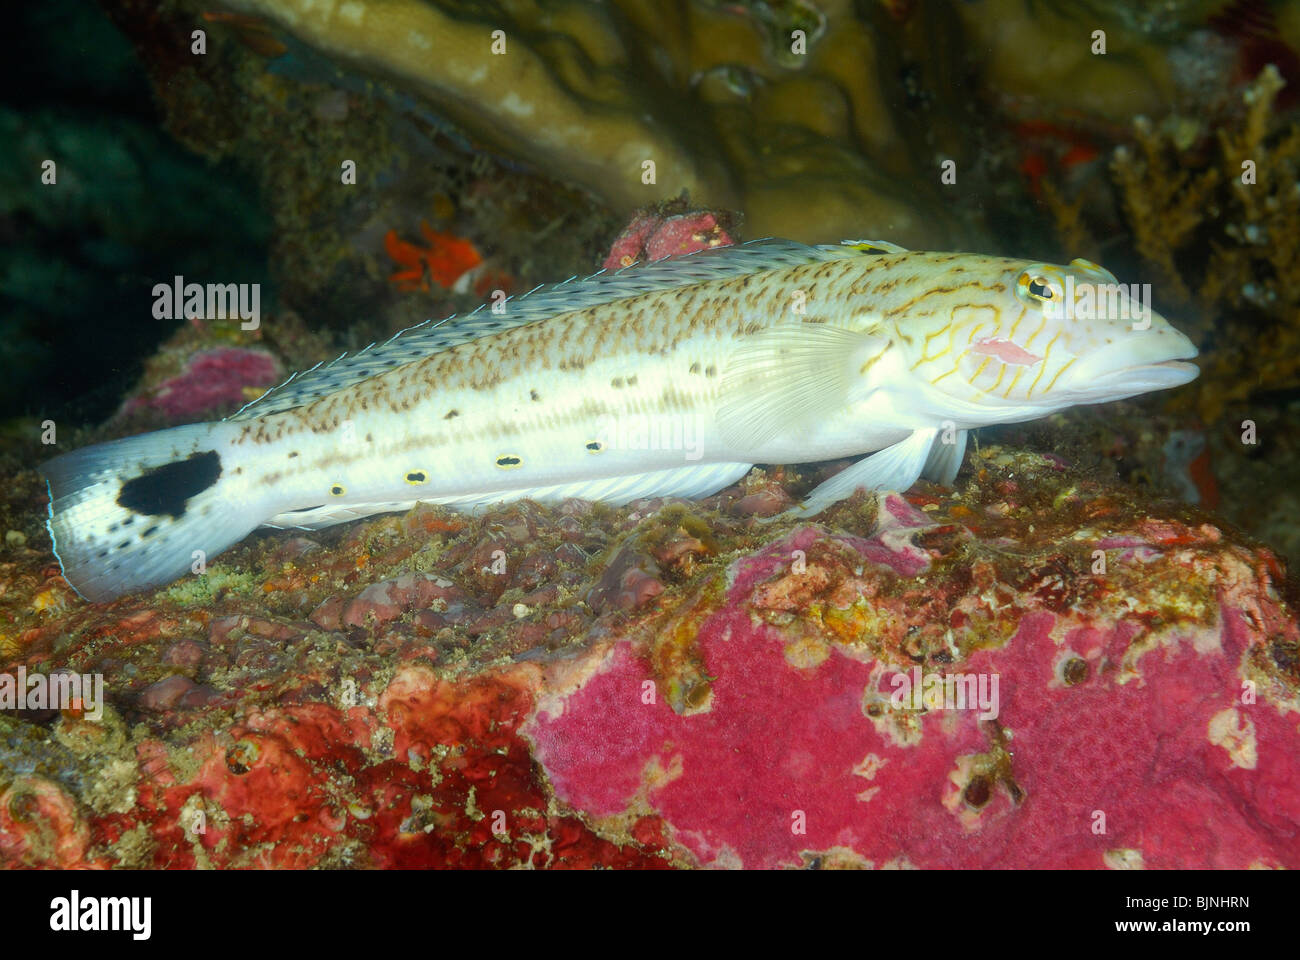 Speckled sandperch fish in the Similan Islands, Andaman Sea Stock Photo